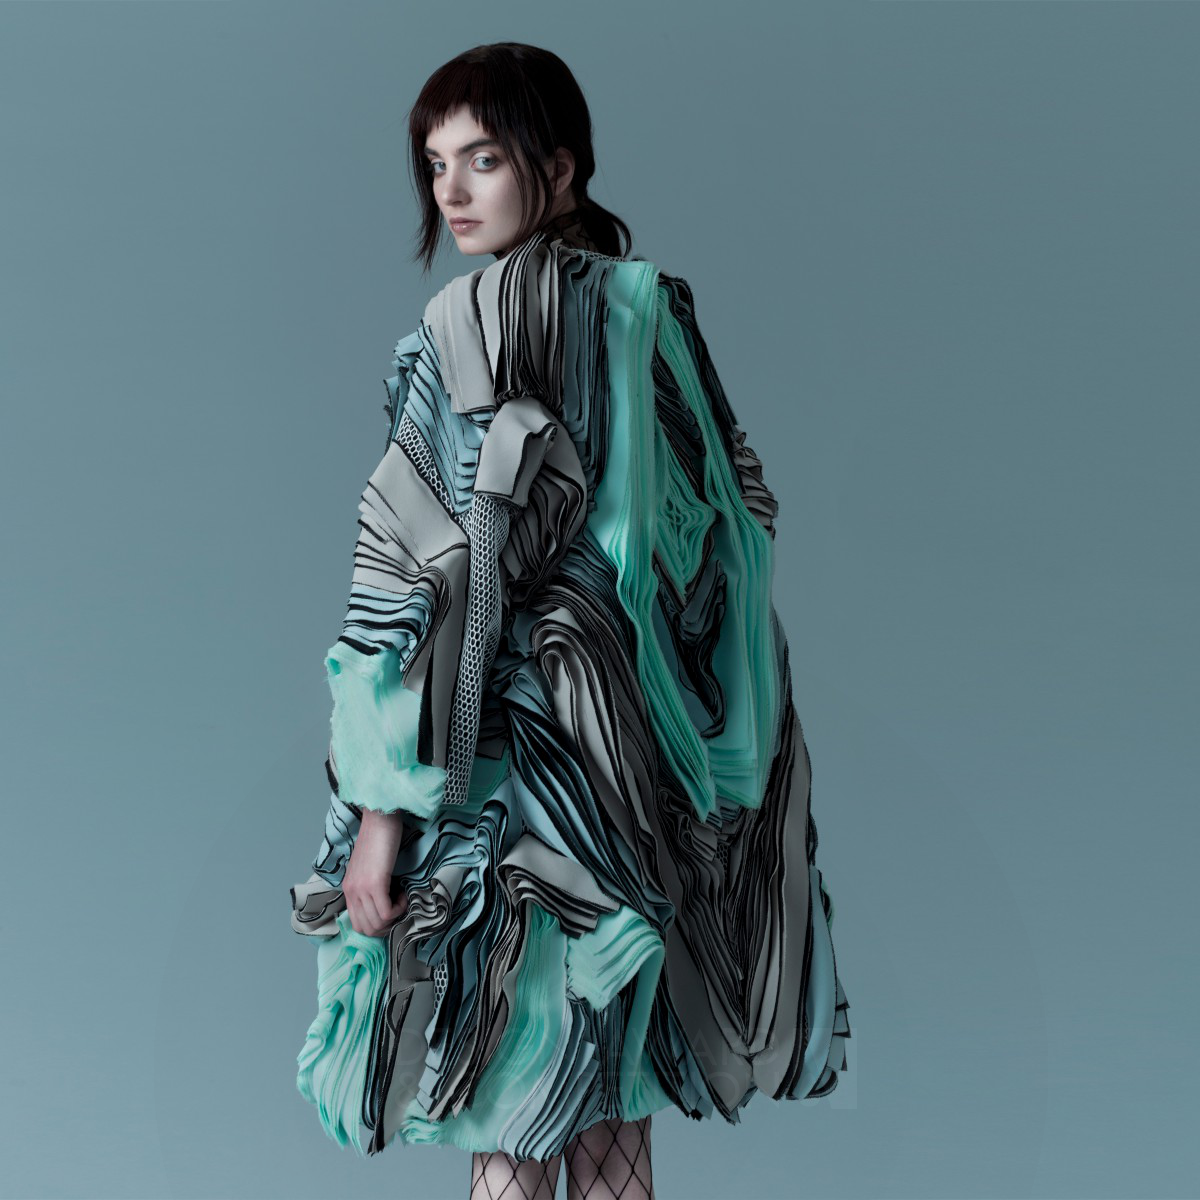 Traces Womenswear Collection by Rong Zhang Platinum Fashion, Apparel and Garment Design Award Winner 2018 